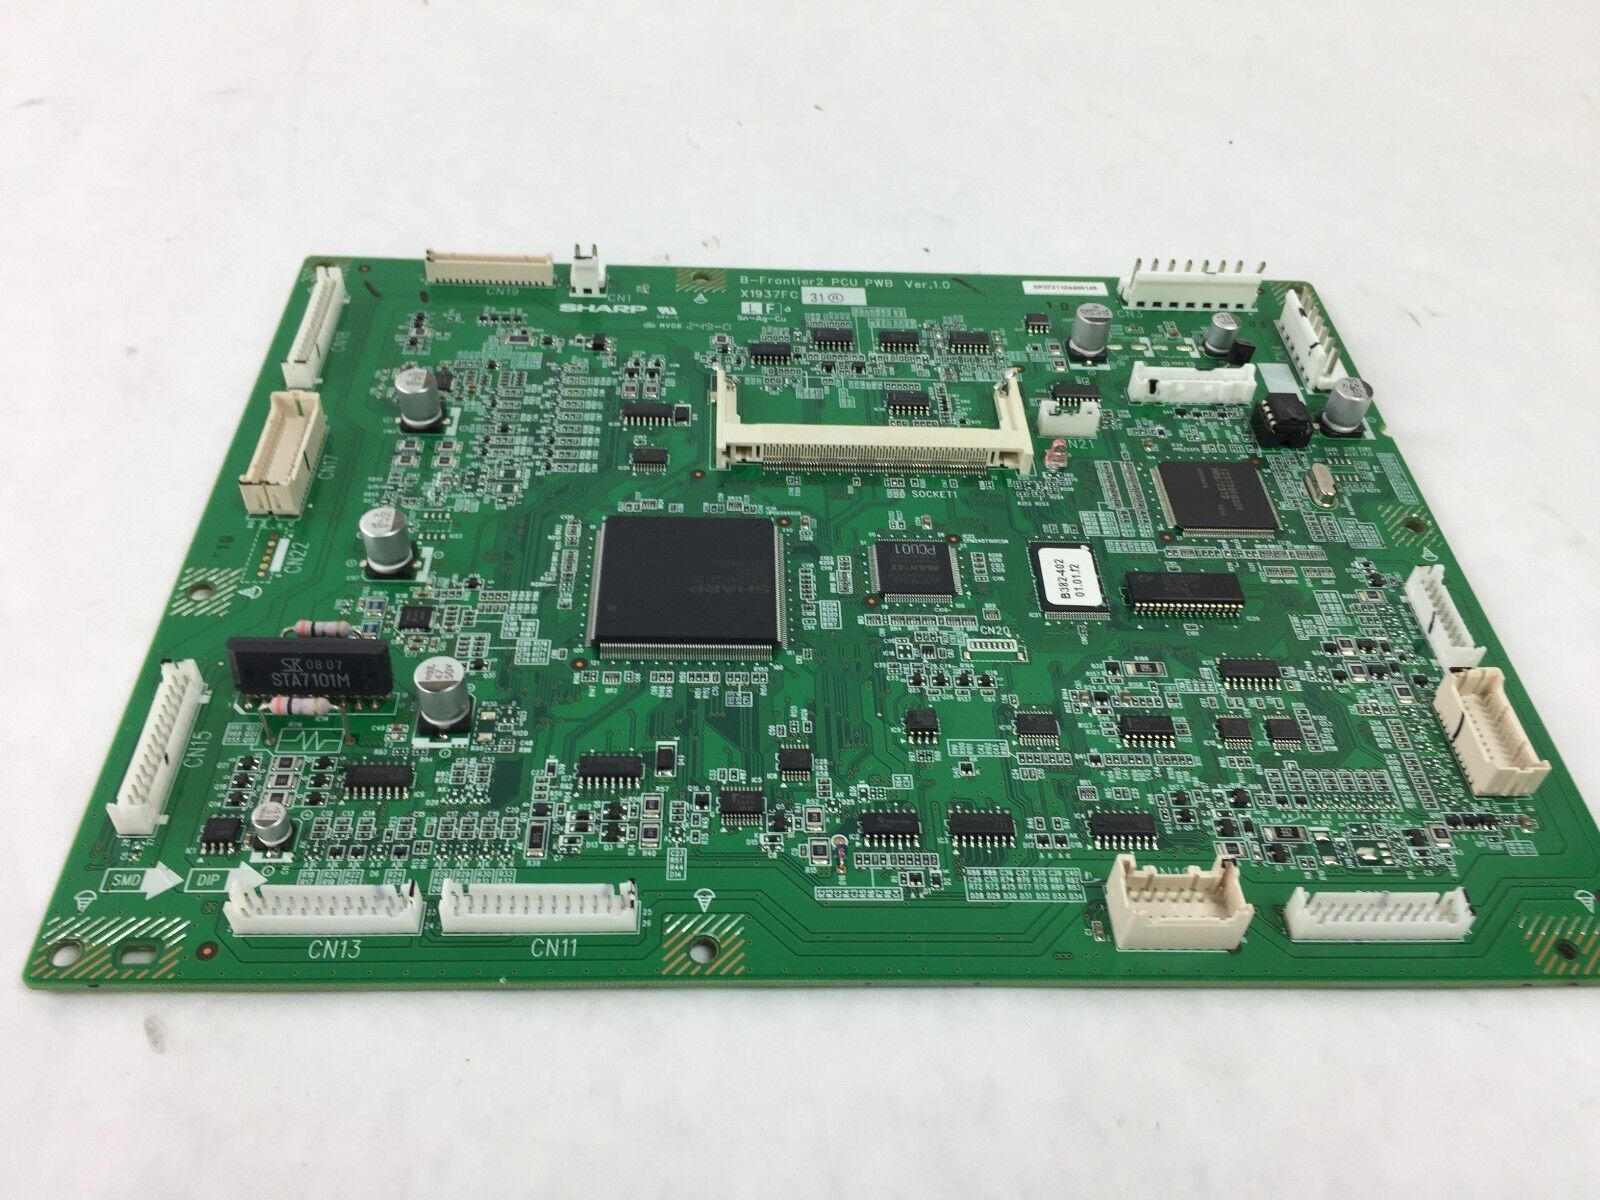 Sharp MX-C401 C400 DX-C401 C402SC Frontier PCU Board Asy with Firmware